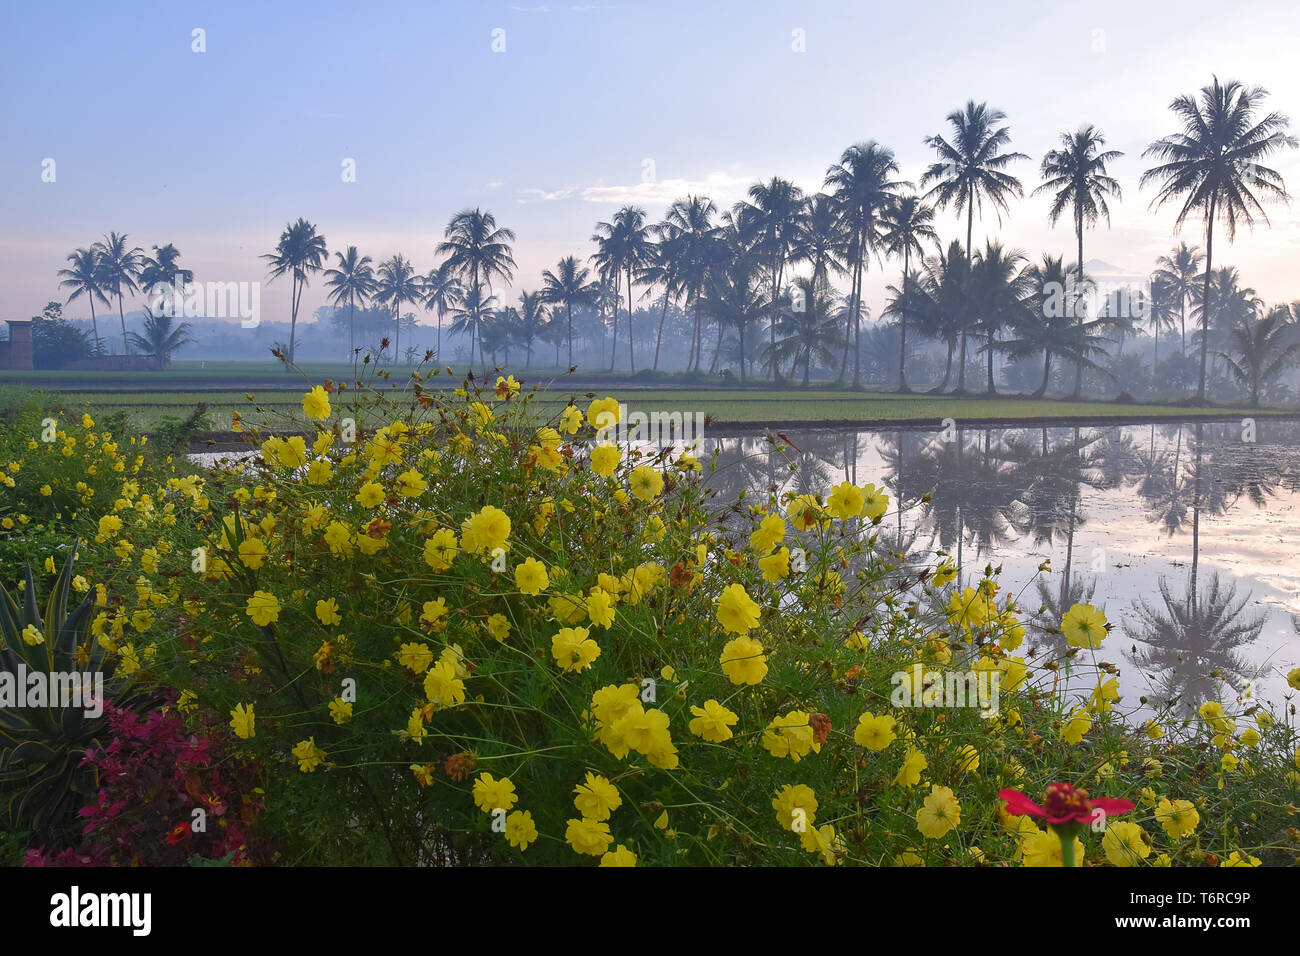 beautiful scenery in the village, farmer's fields, stretch of coconut trees, and colorful flowers Stock Photo